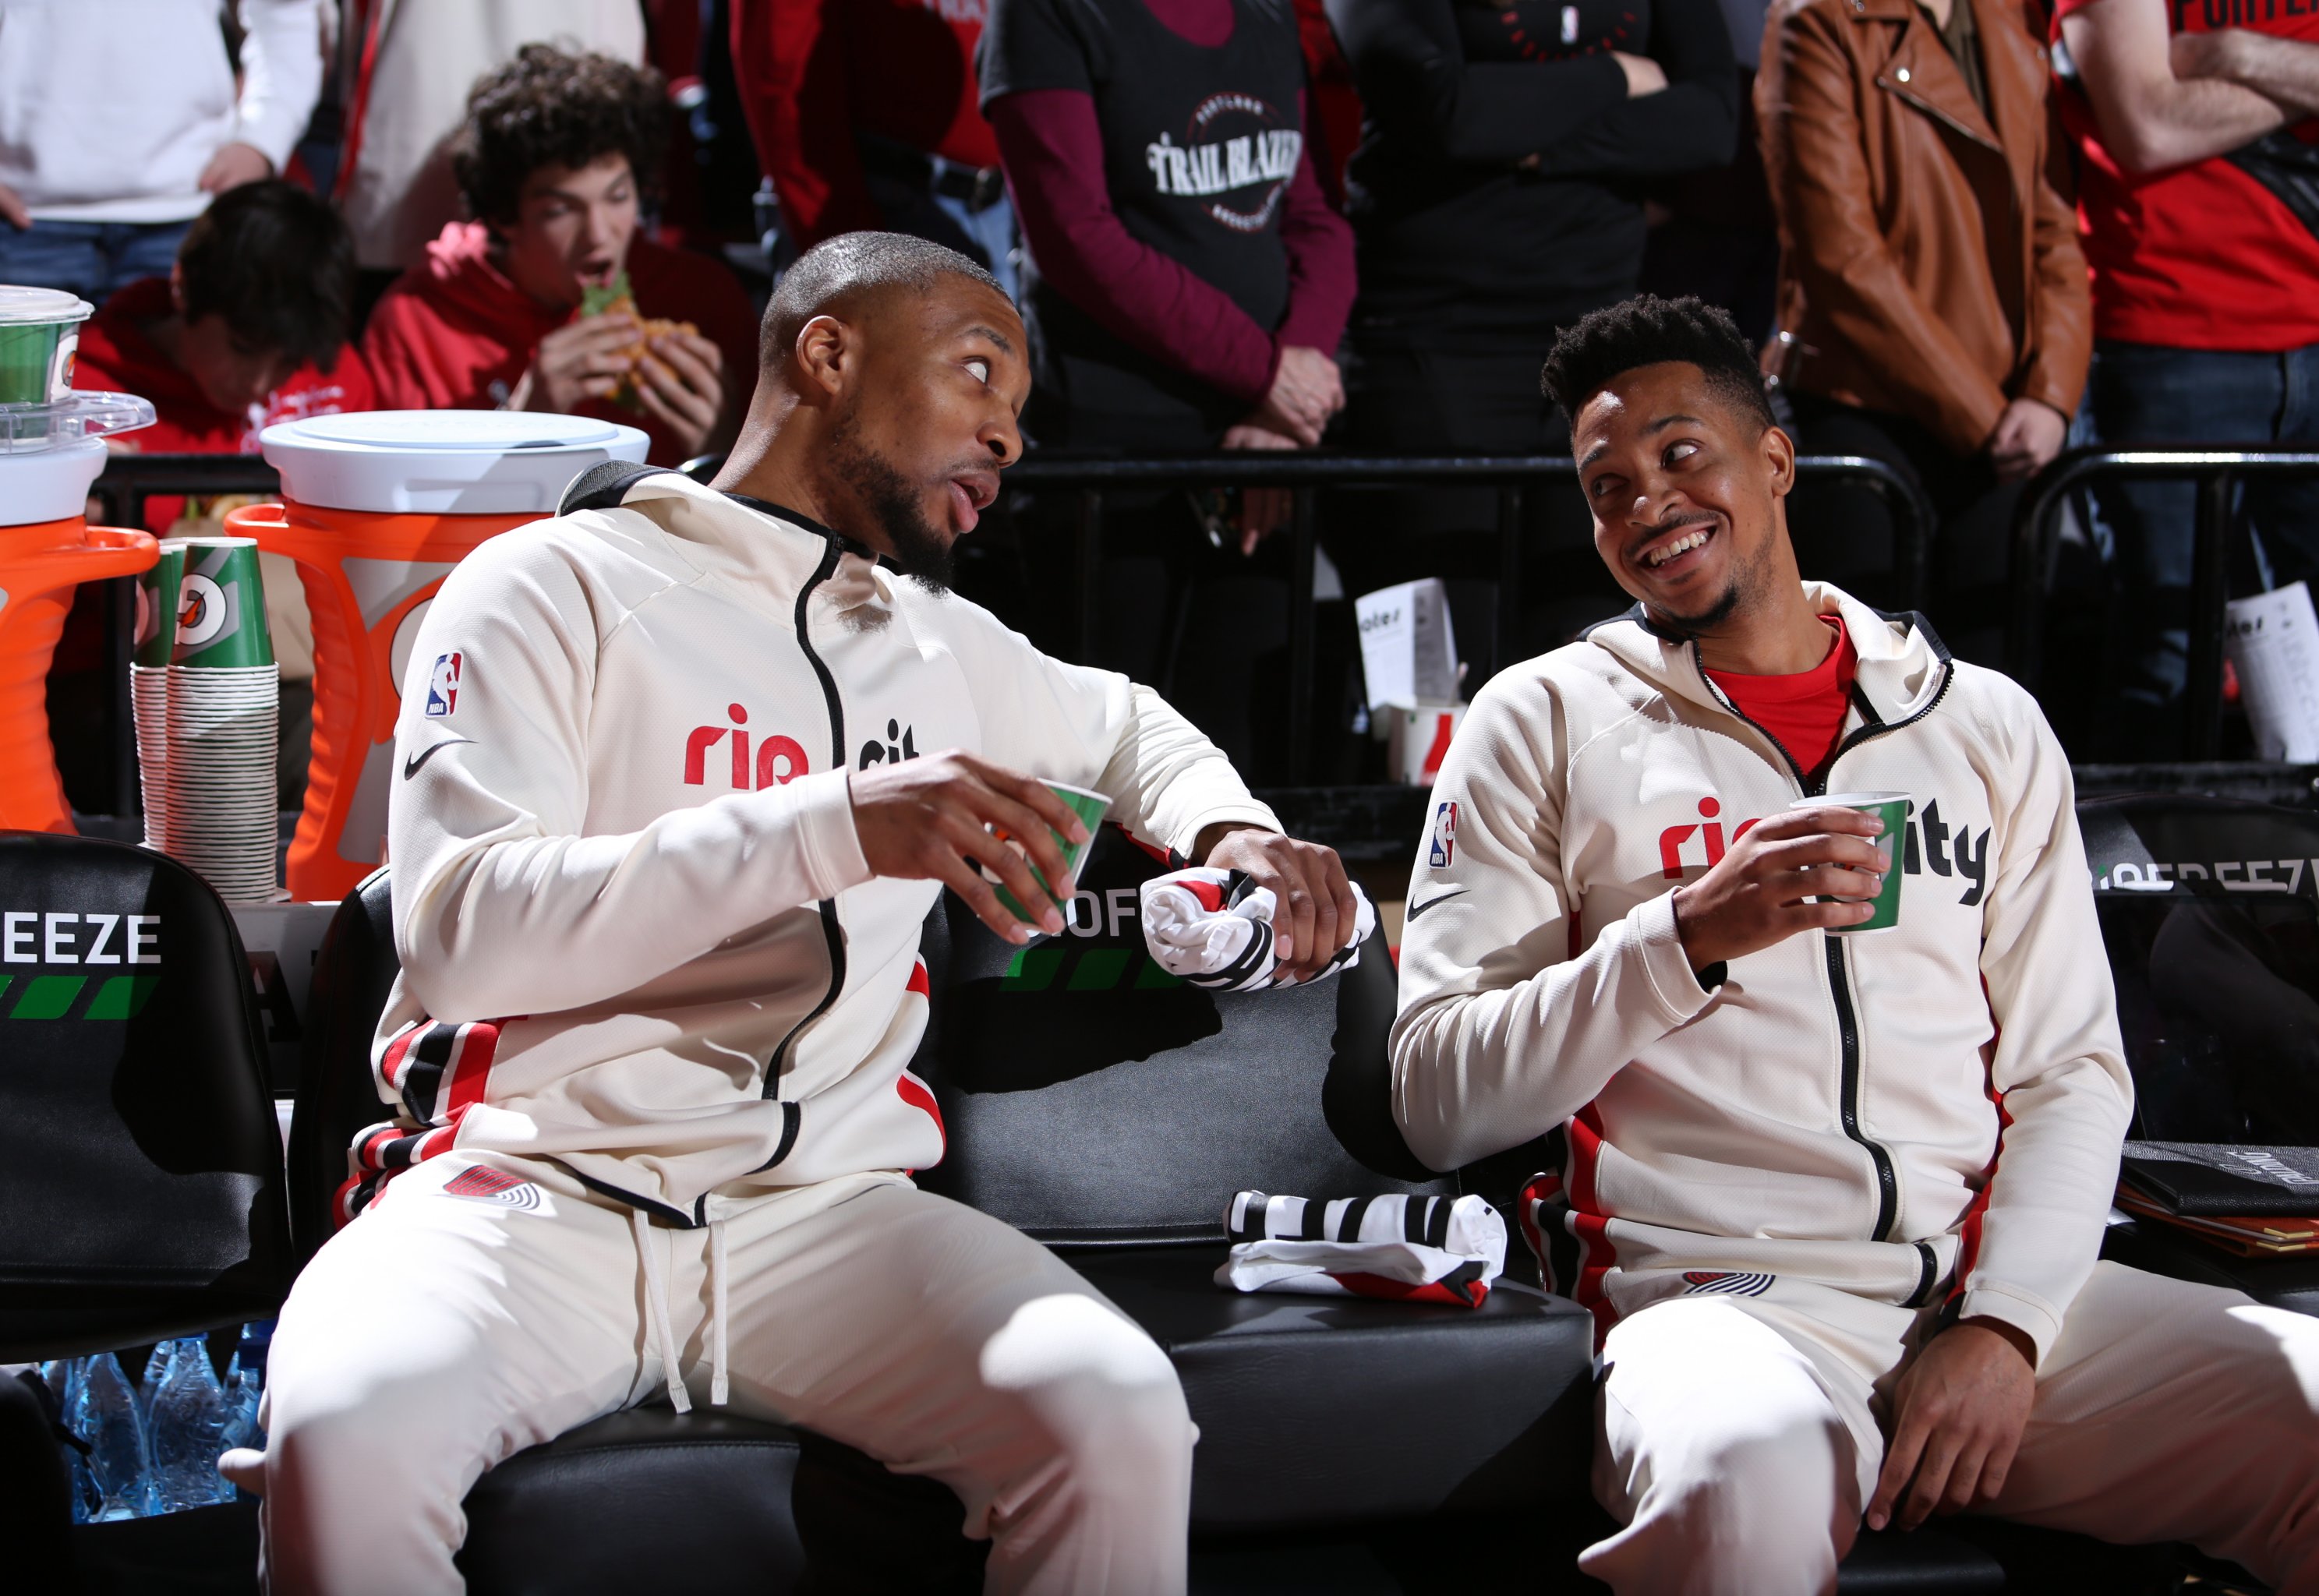 Rare picture of Rui Hachimura Smiling - Give him your energy so he